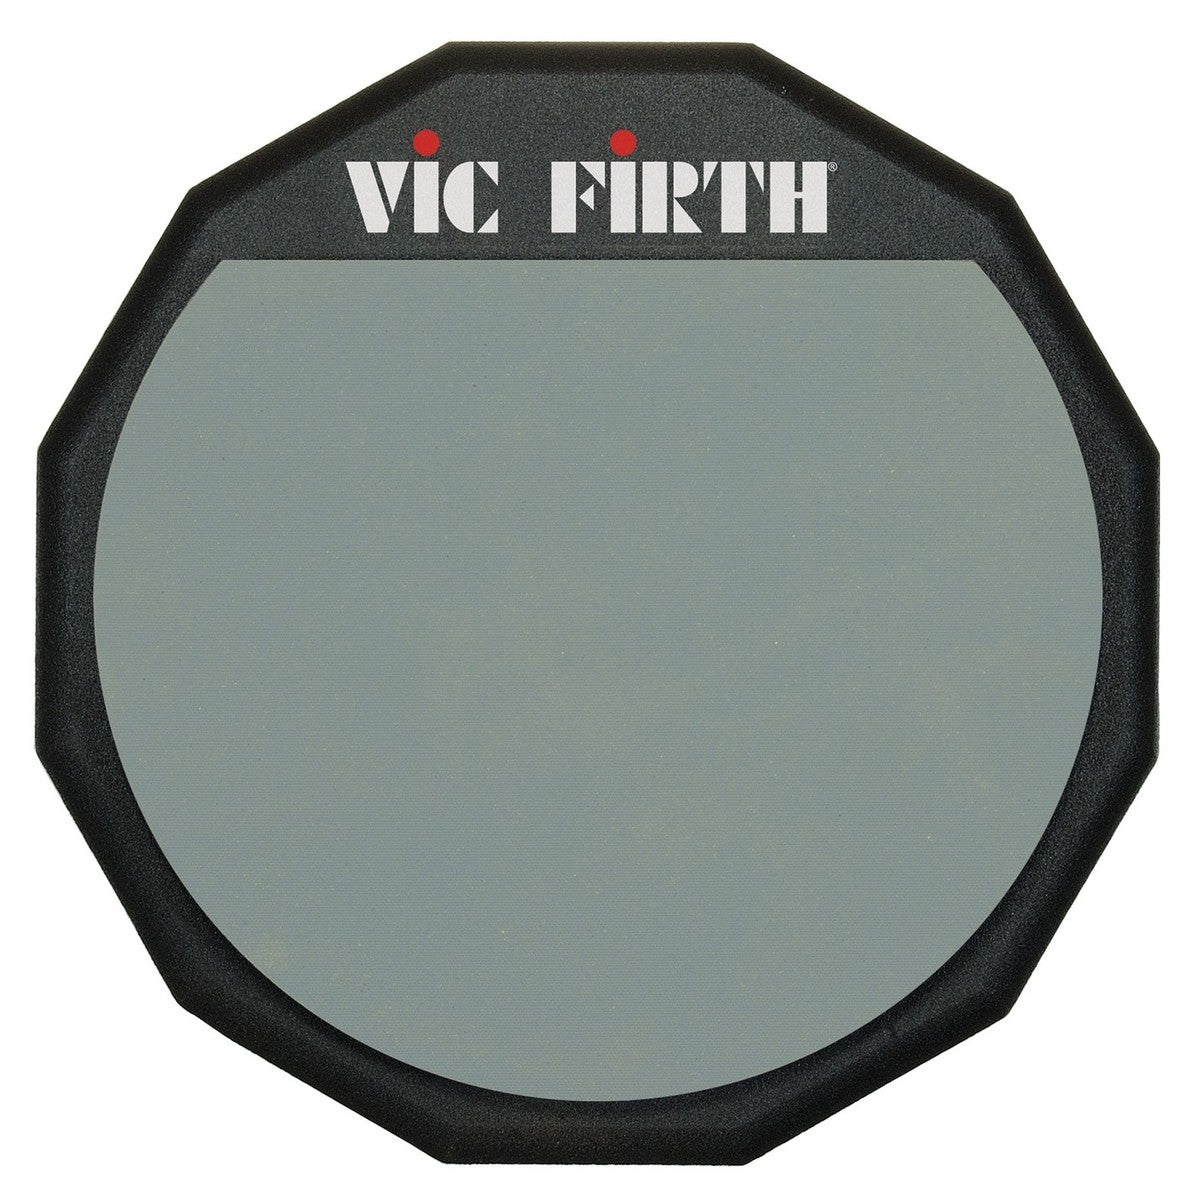 Vic Firth 12" Single Sided Practice Pad